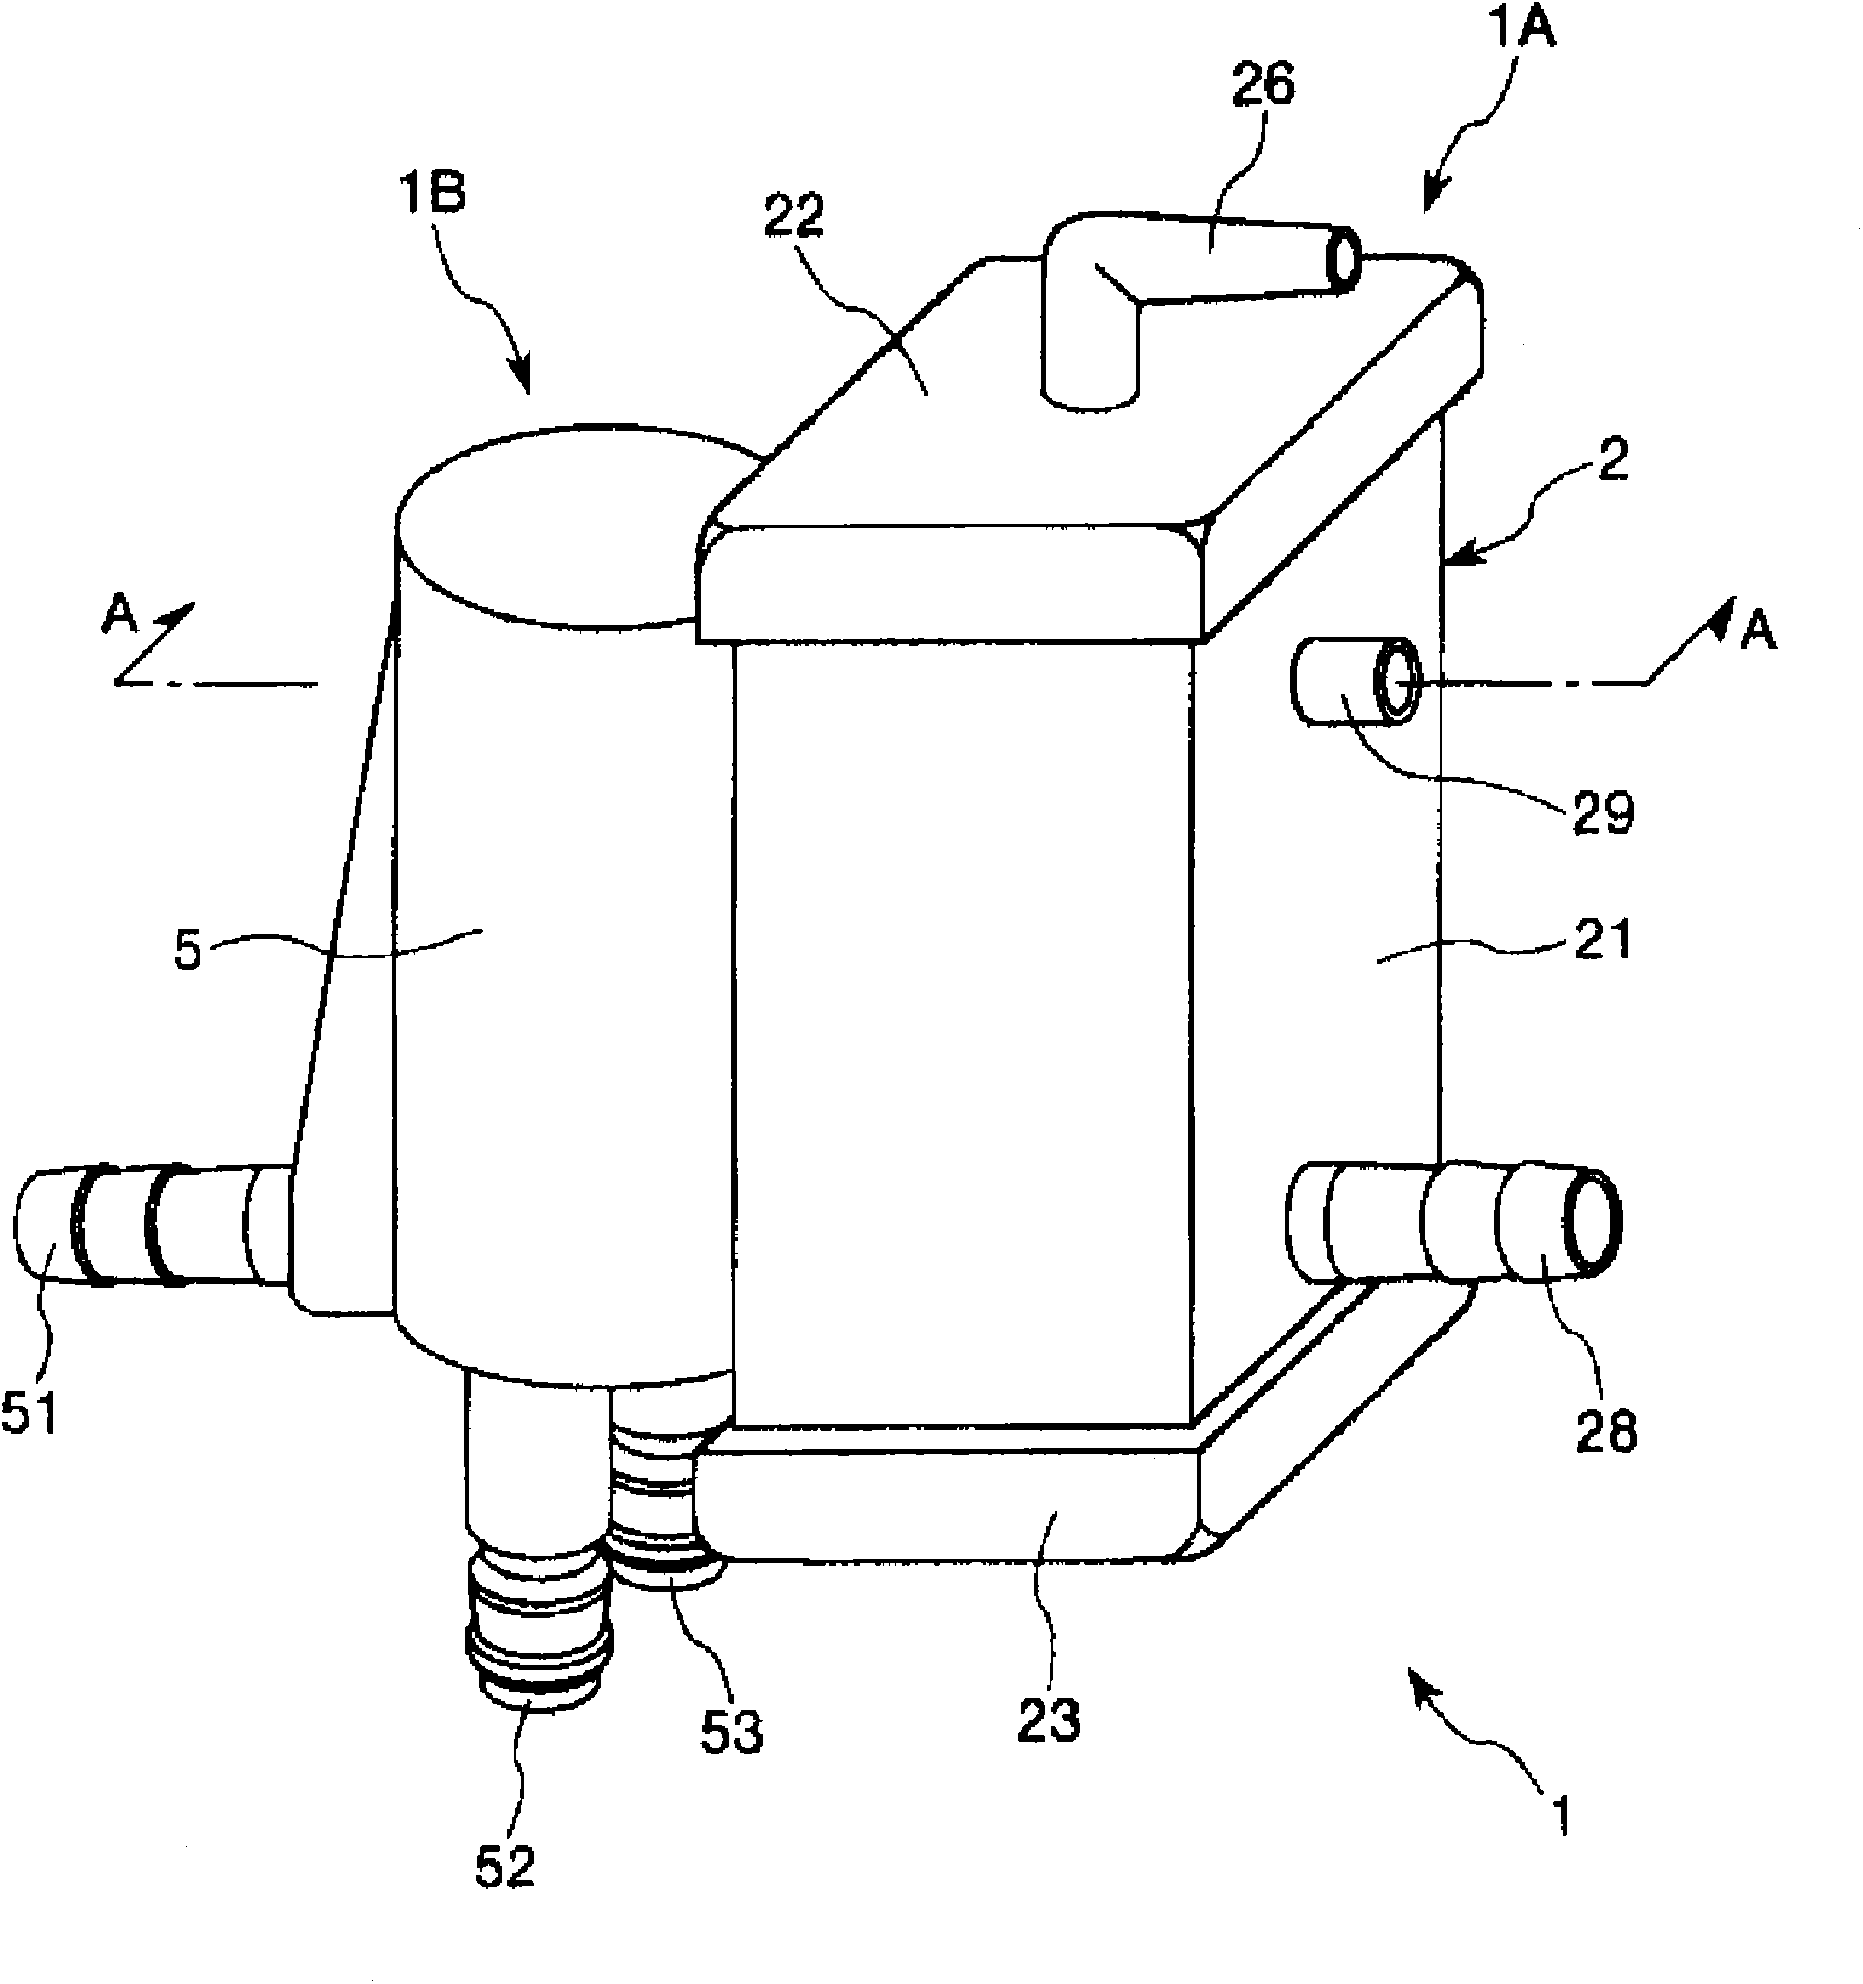 Artificial lung and extracorporeal circulation device